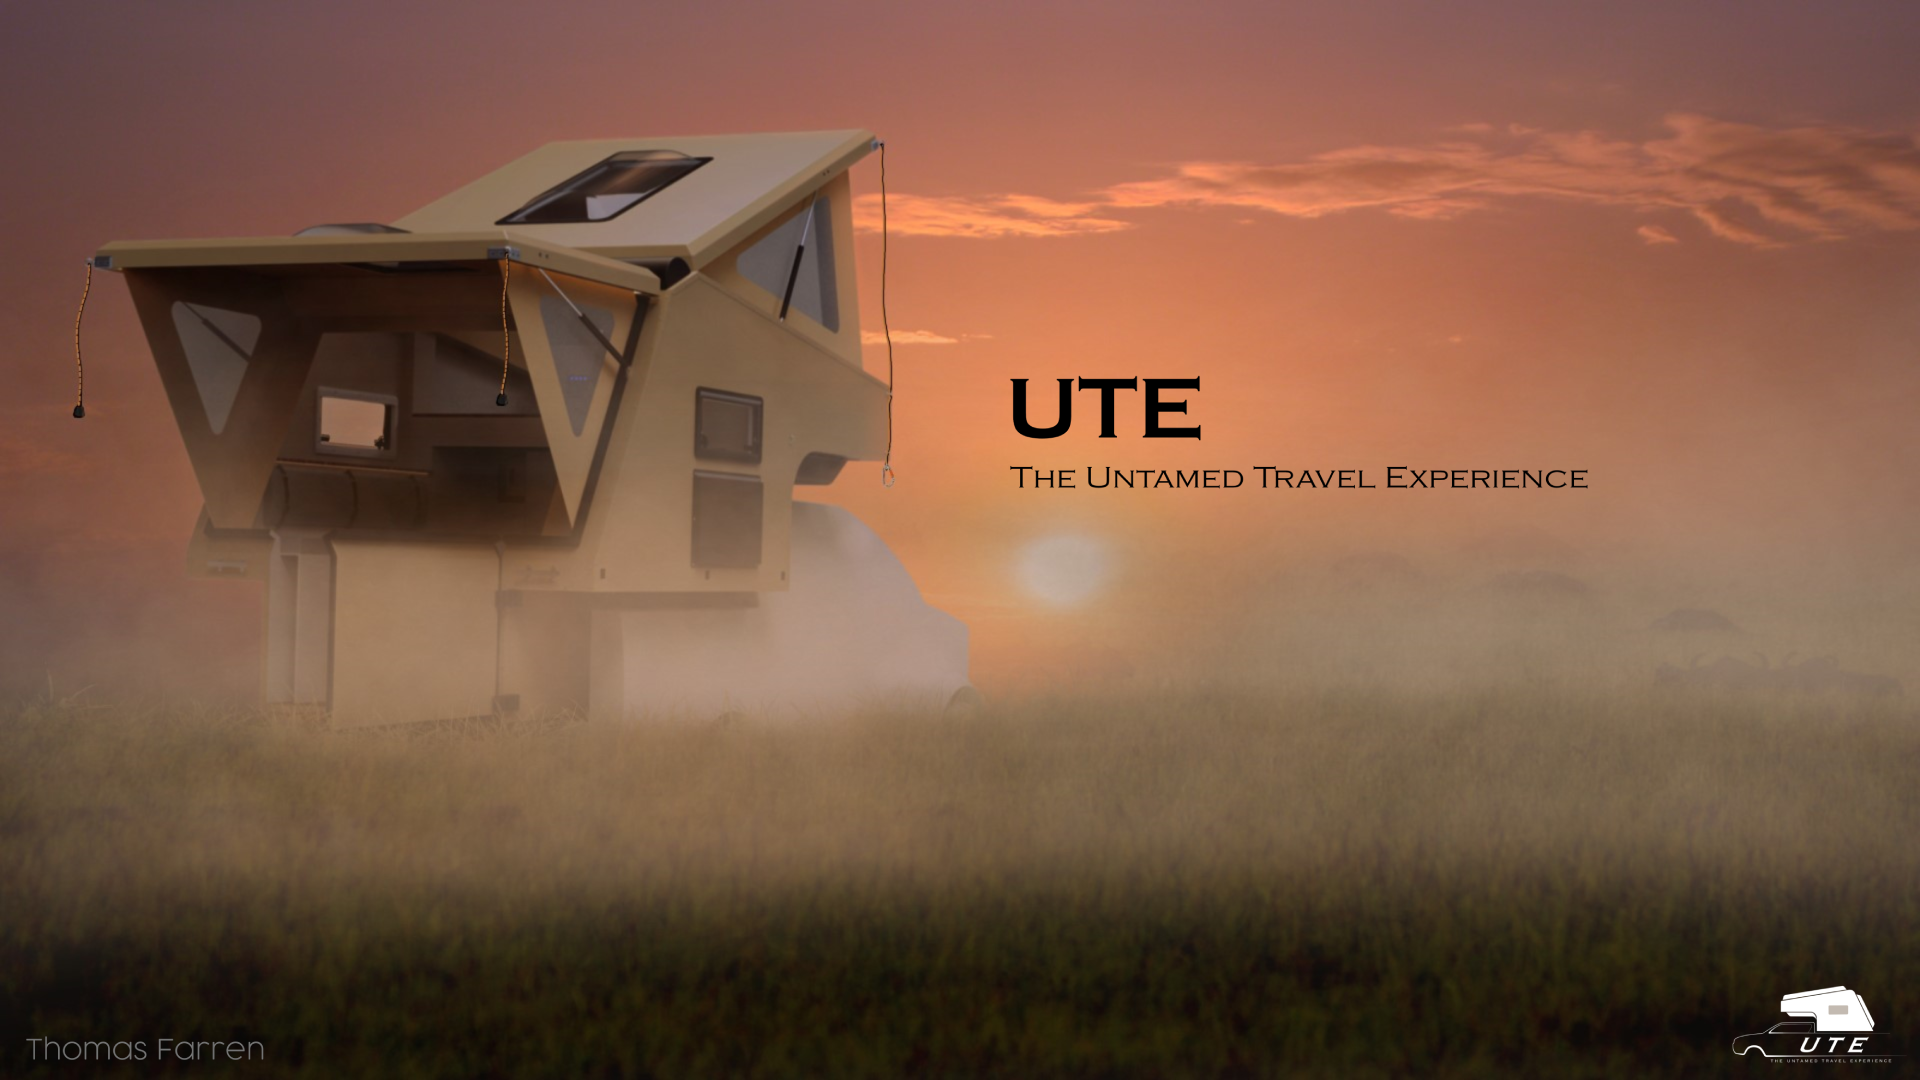 UTE: The Untamed Travel Experience